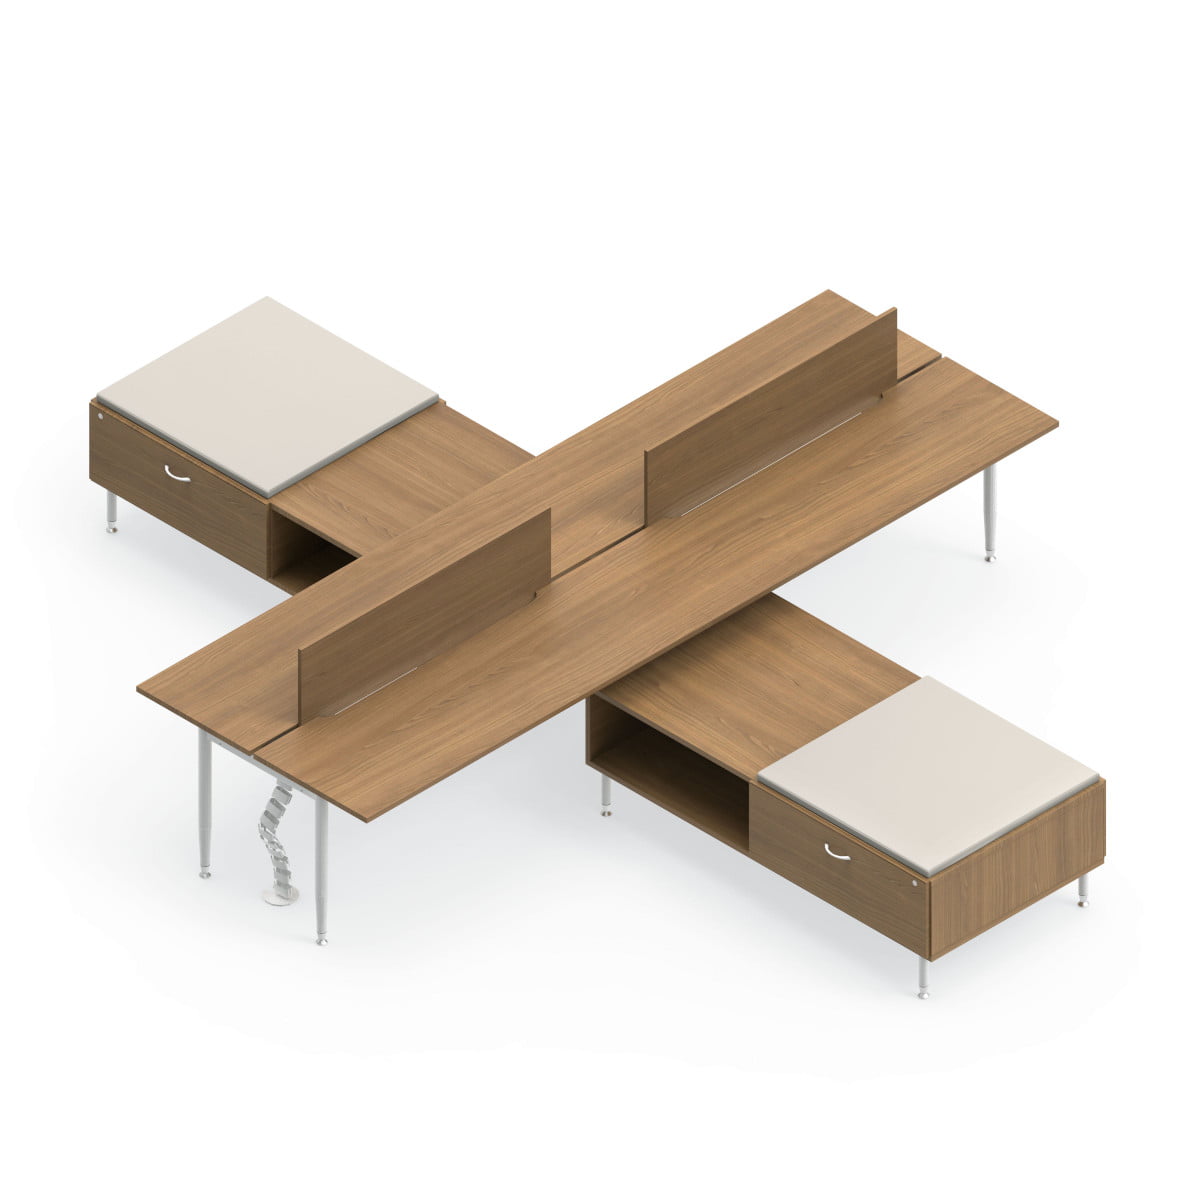 Global Sidebar 4-Person Benching, with modesty panels in place. It is on a white background. Generously sized credenza's are placed between each station, on both sides.